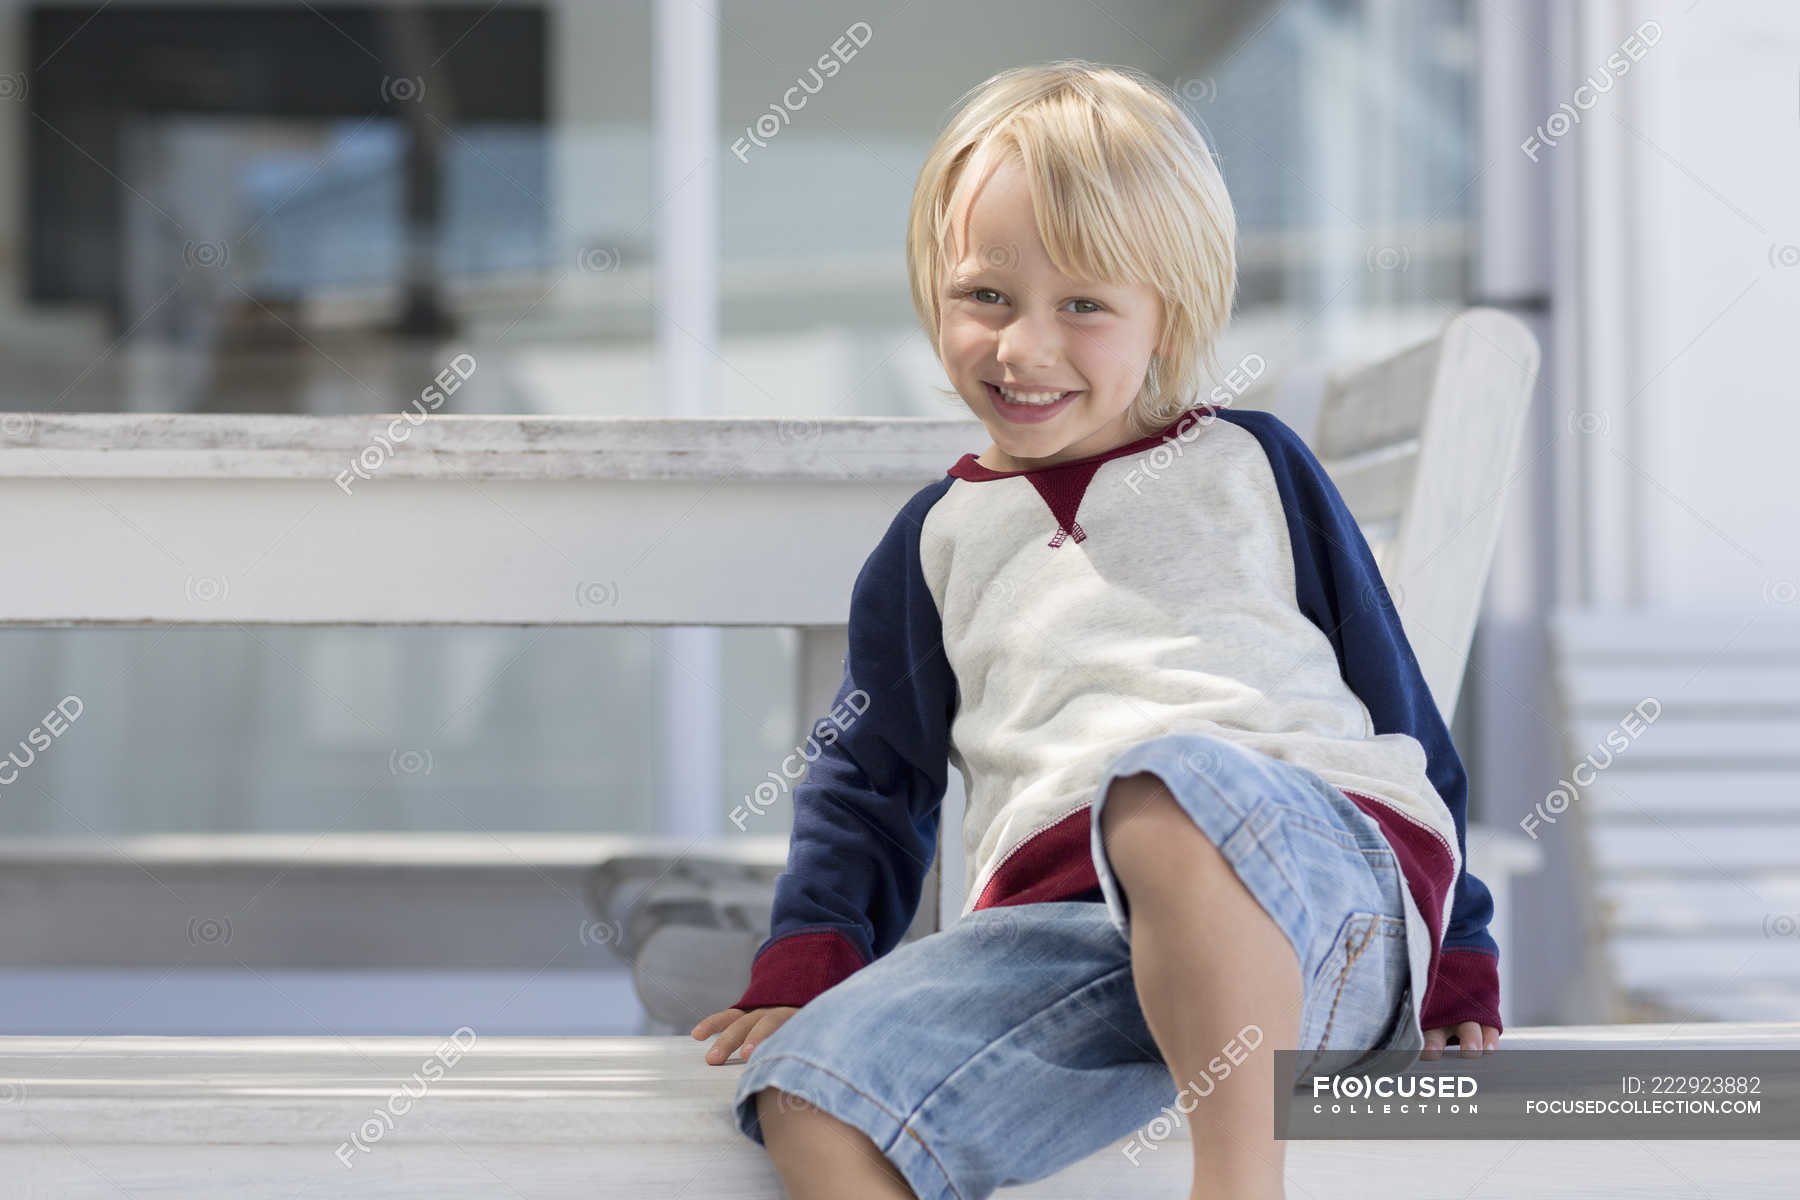 Portrait Of Happy Little Boy With Blonde Hair Smiling Outdoors